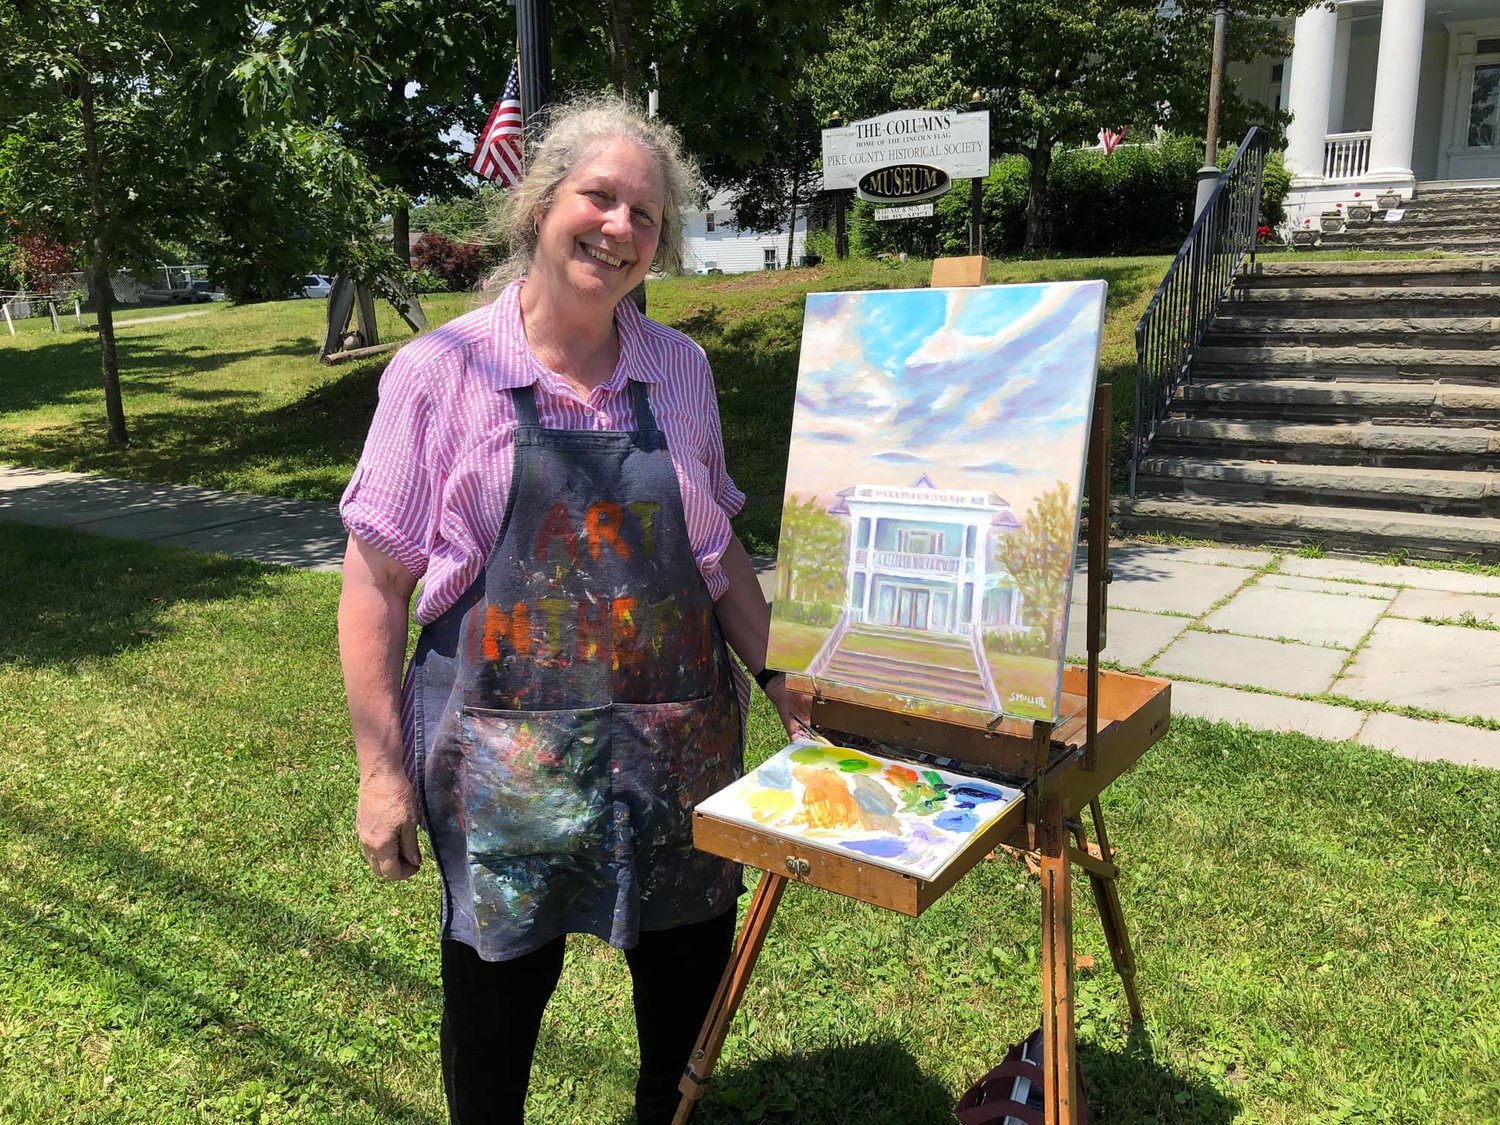 Artist Susan Miller and her 2019 painting of The Columns Museum